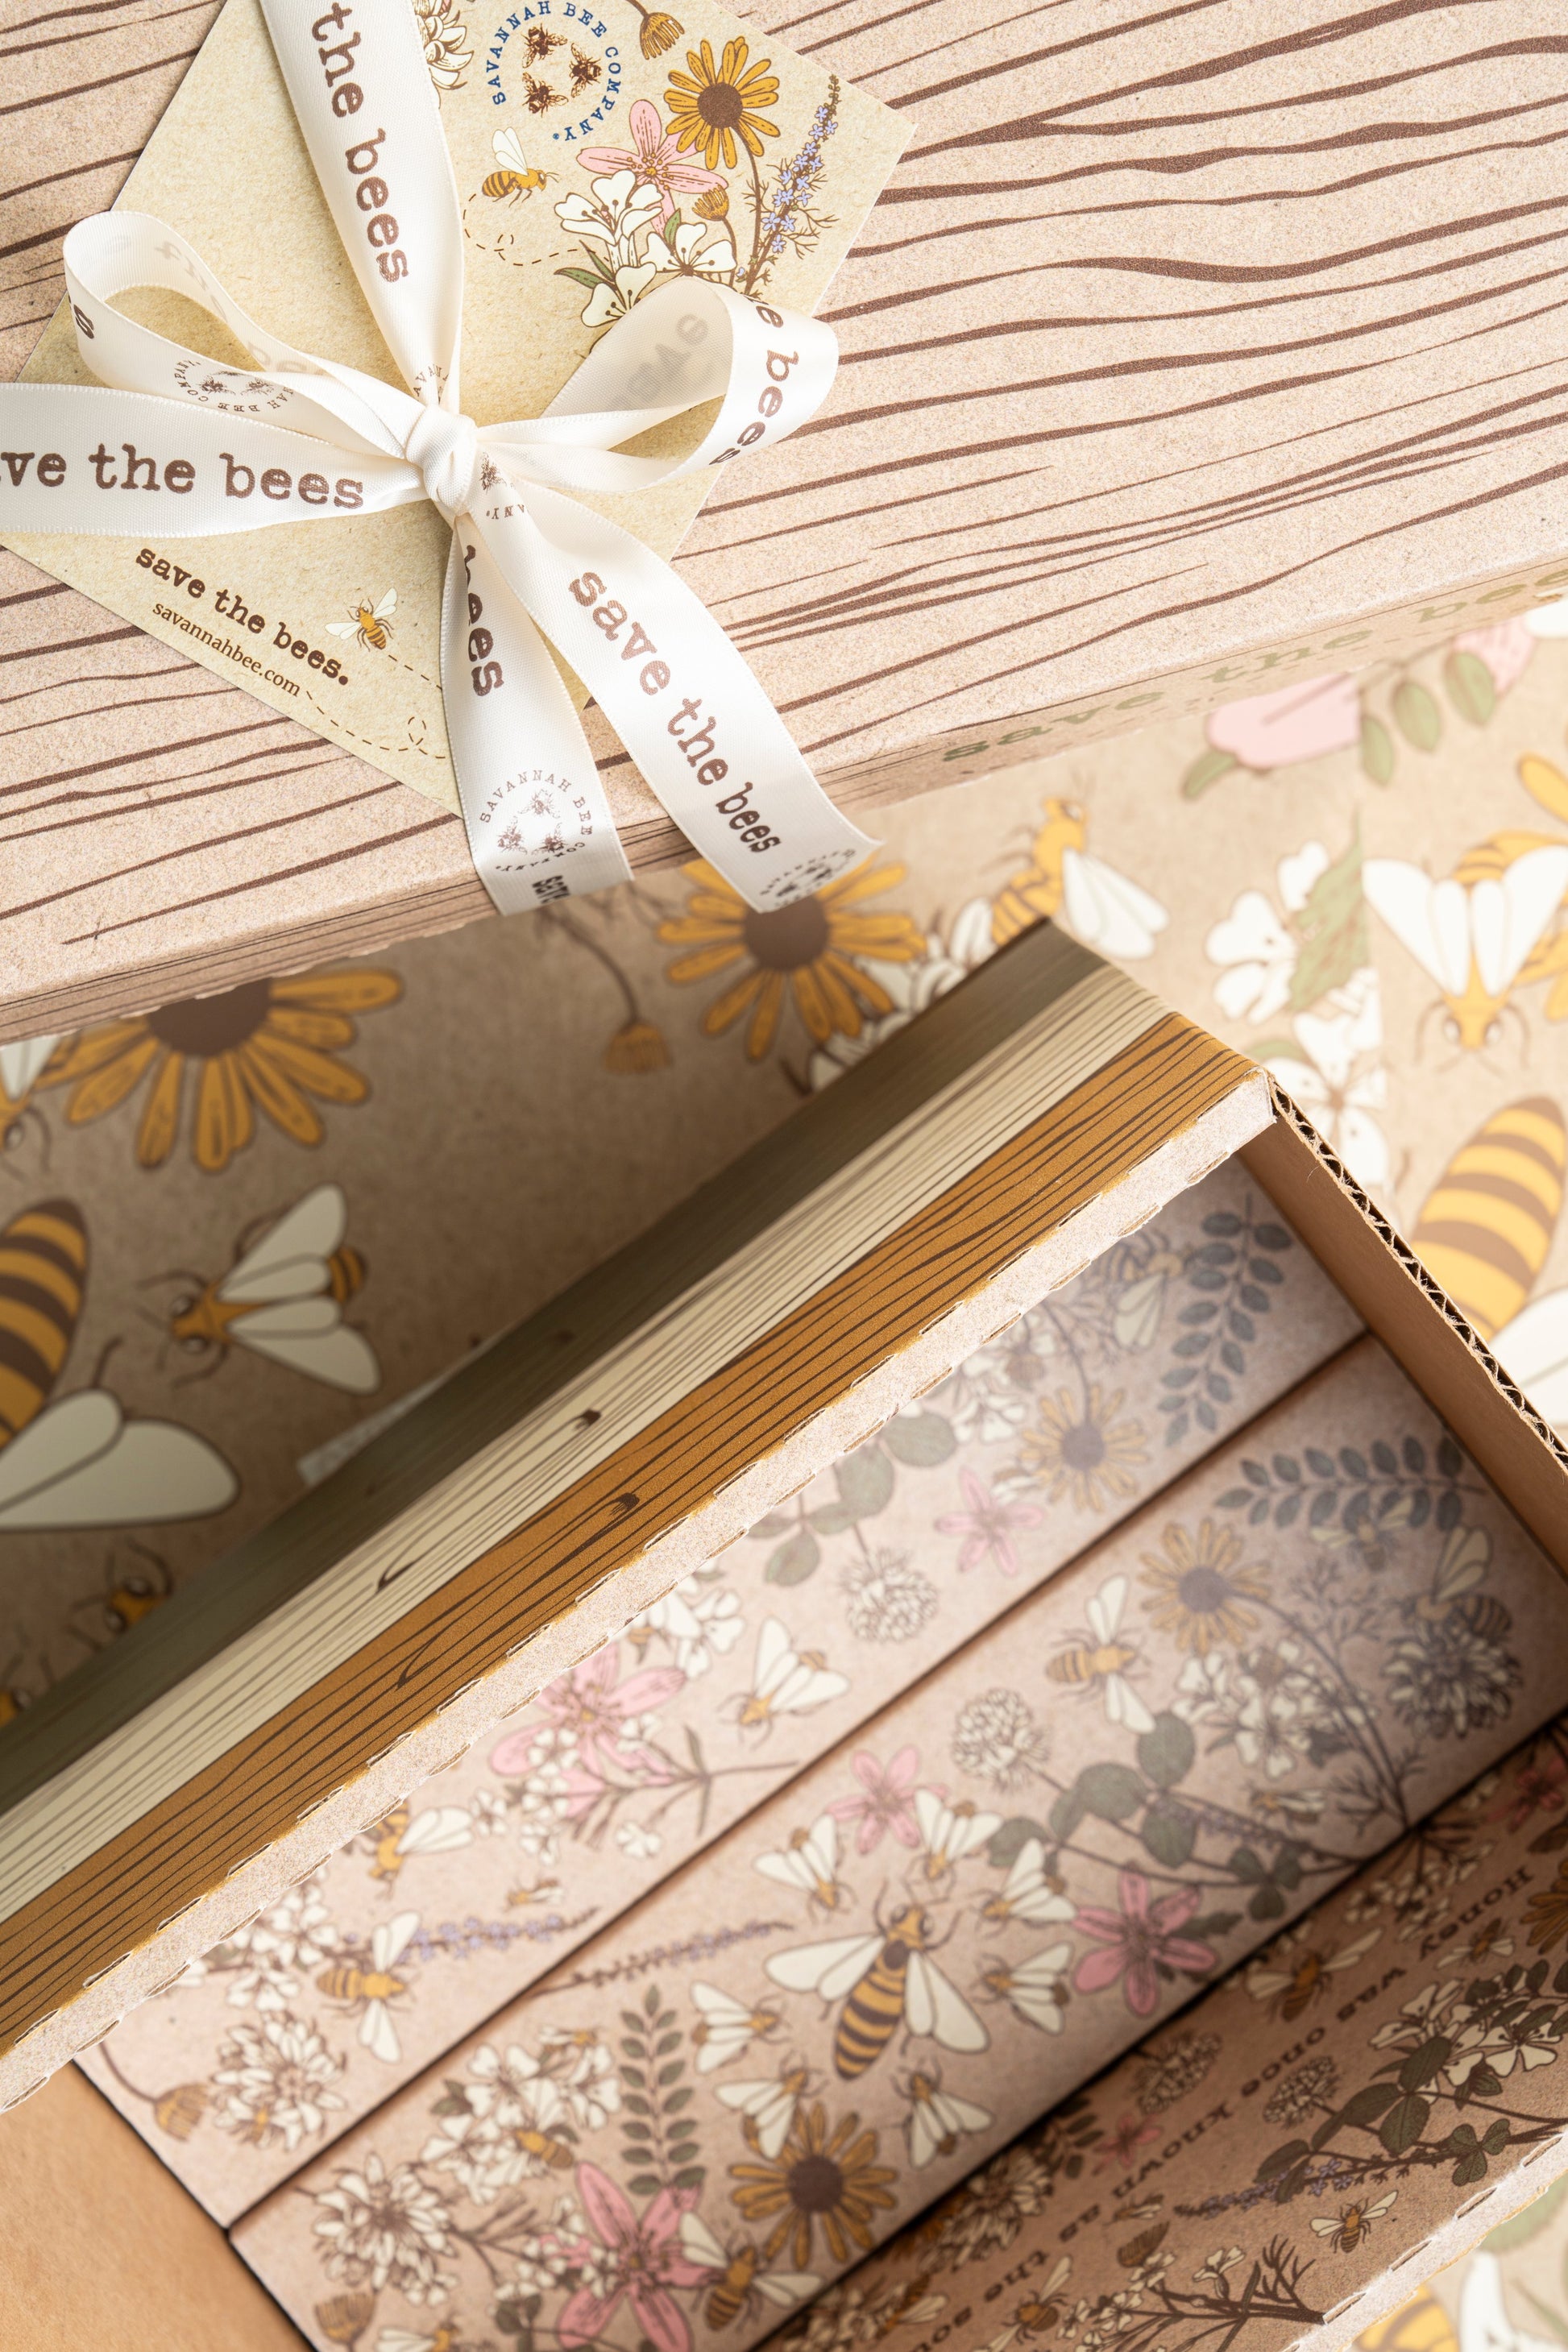 Save the bees gift box open from the top